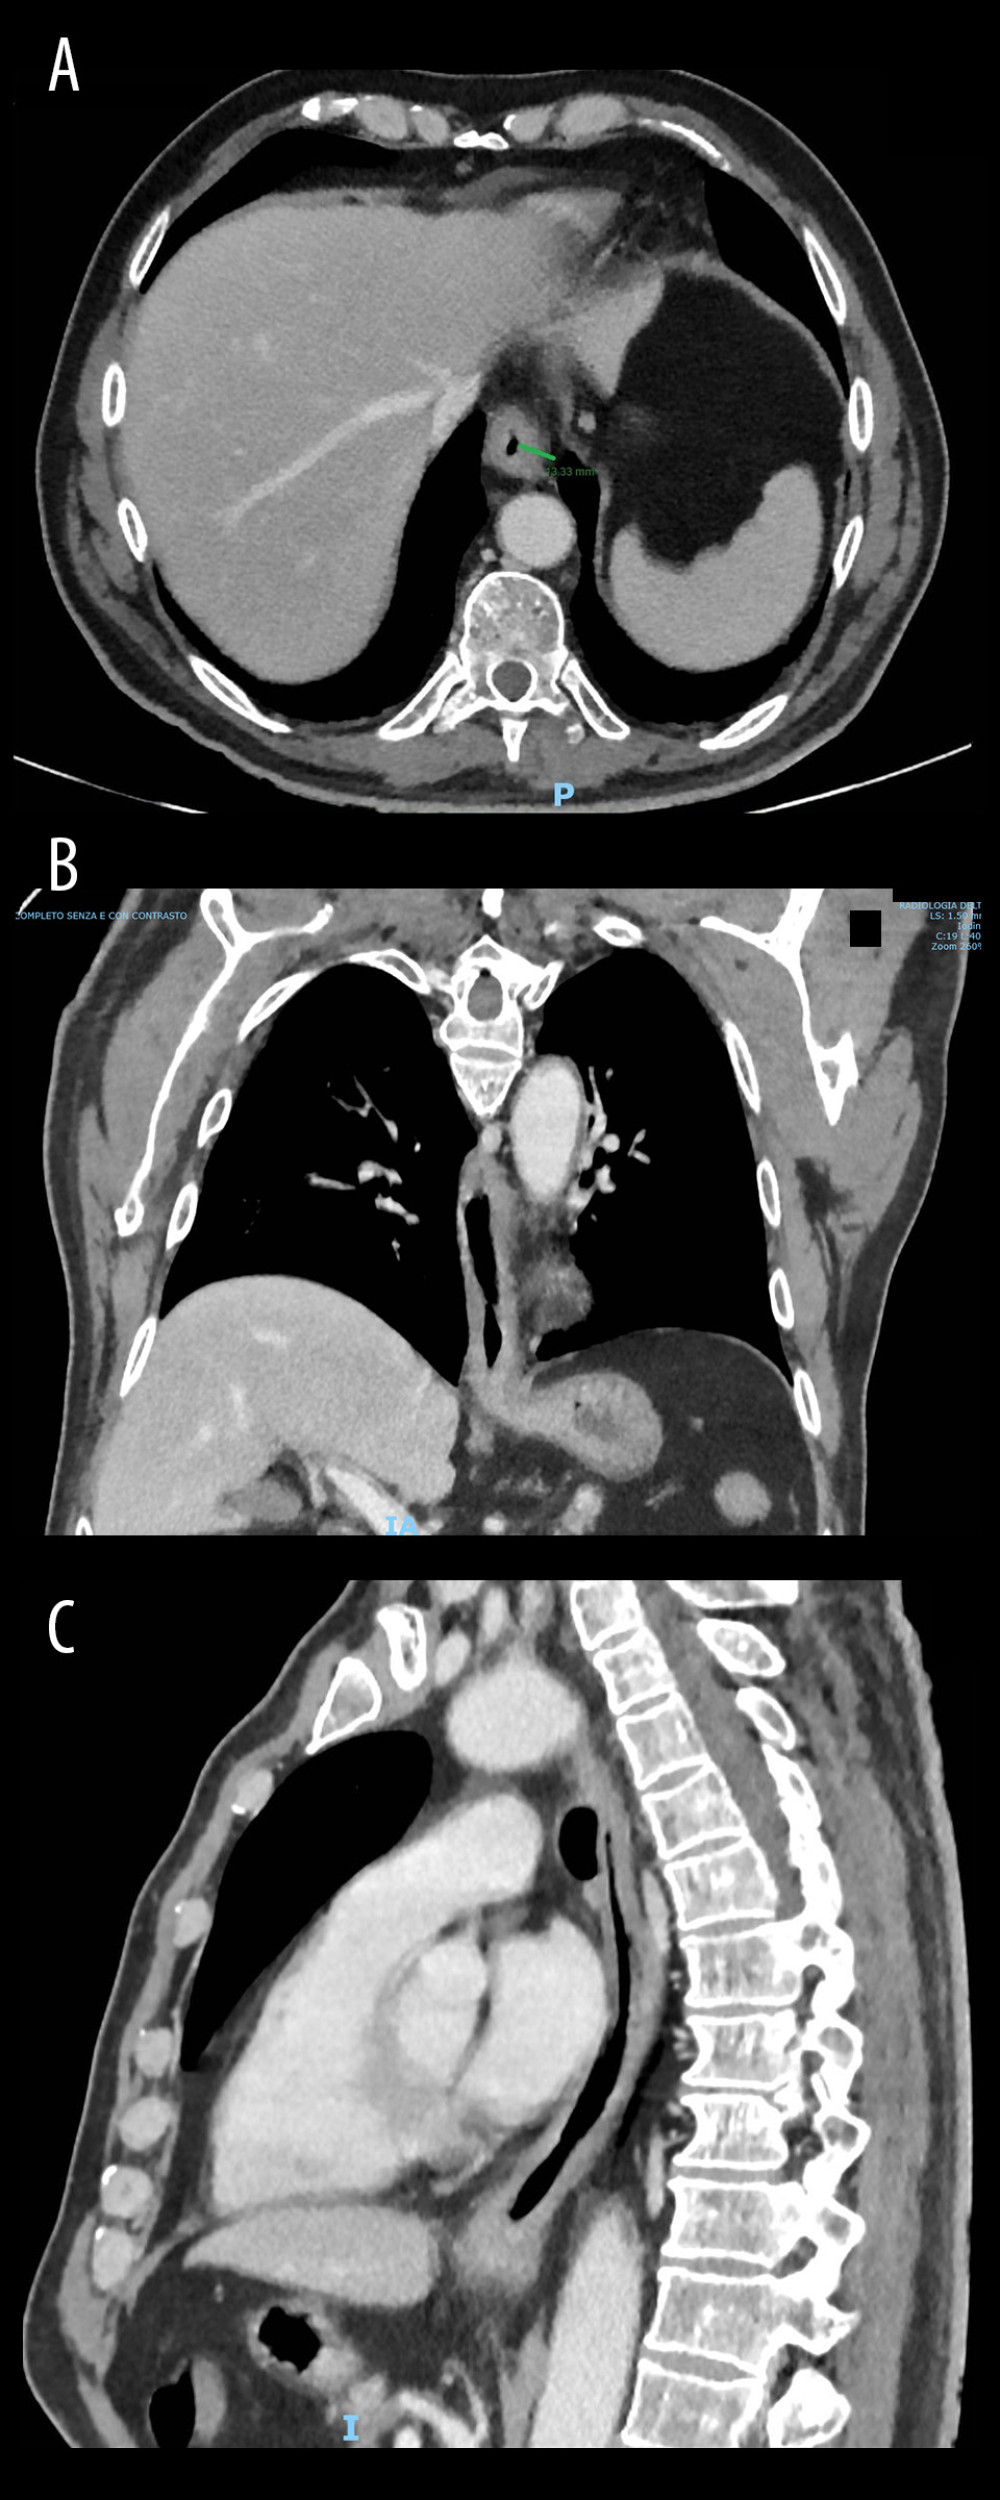 CT scan, transversal section of thorax, showing concentric thickening of the esophageal wall (A). The green line indicates the maximal thickening (13 mm); coronal section of thorax, showing craniocaudal extension of the esophageal wall (B); sagittal section of thorax, showing craniocaudal reduction of the esophageal lumen (C).